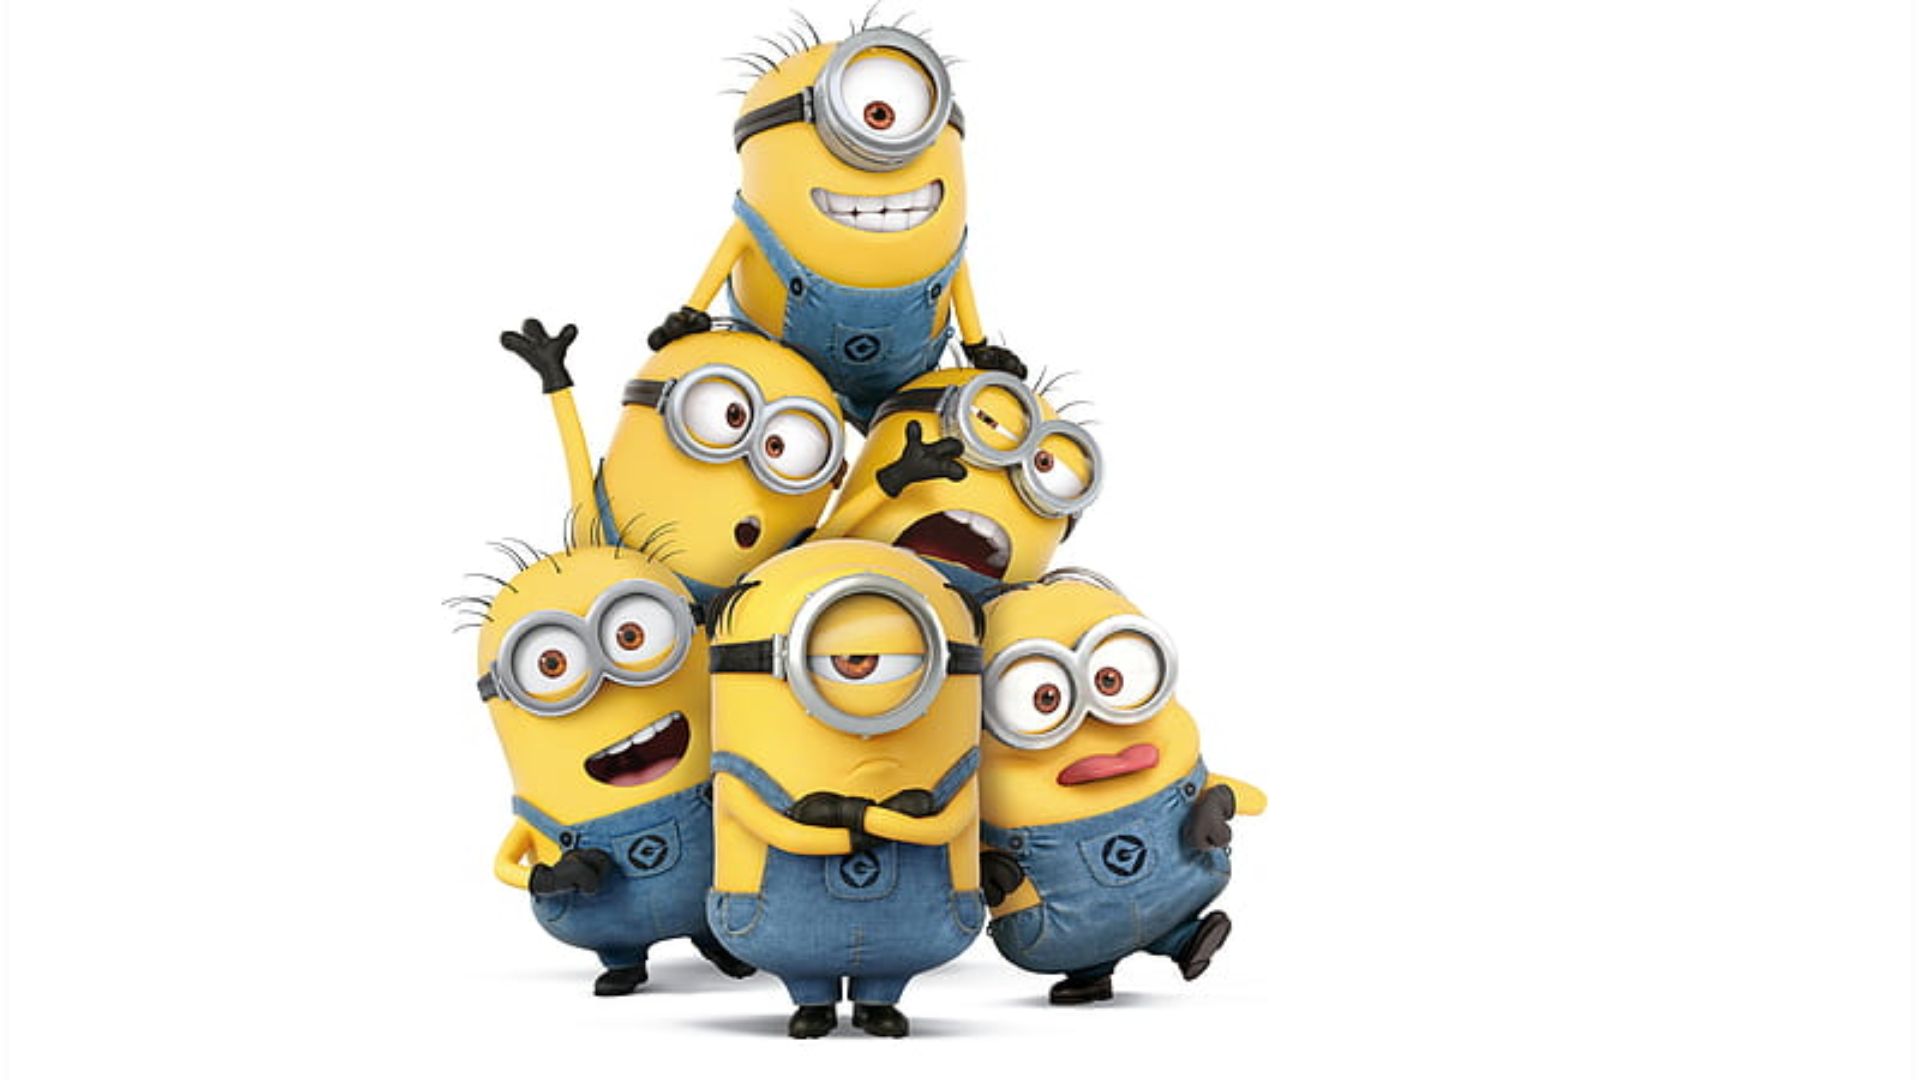 Minions Wallpapers - Top 35 Best Minions Wallpapers Download